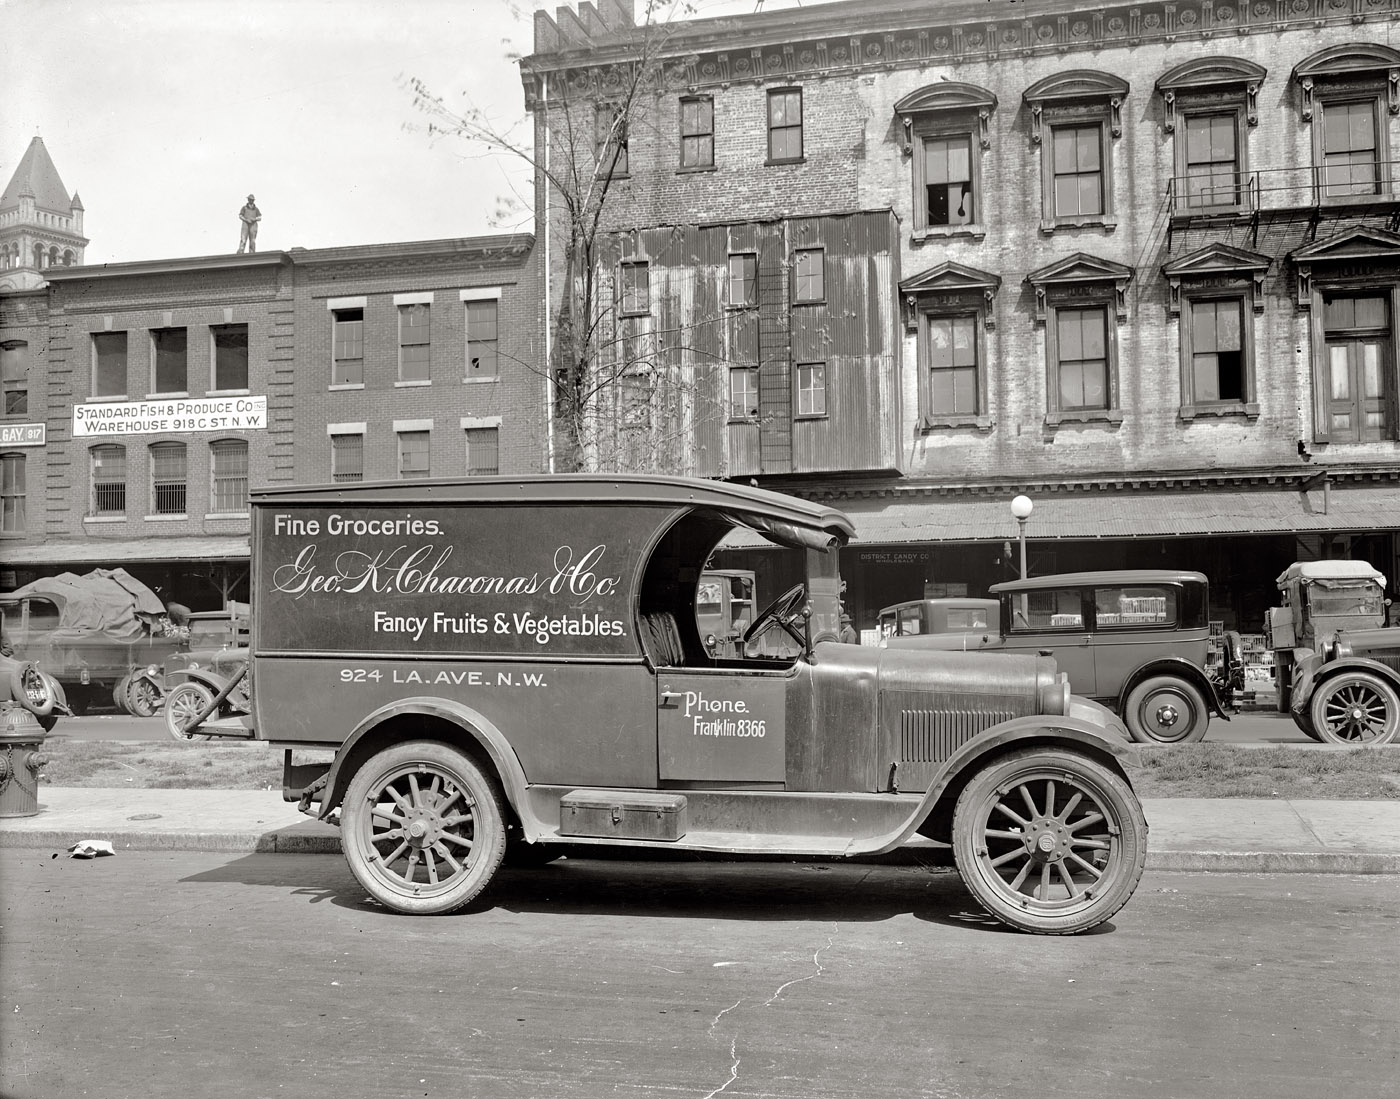 Washington, D.C., circa 1925. "Semmes Motor Co. George K. Chaconas & Co. truck." A Dodge delivery van for the grocery owned by George Chaconas. National Photo Company Collection glass negative. View full size.